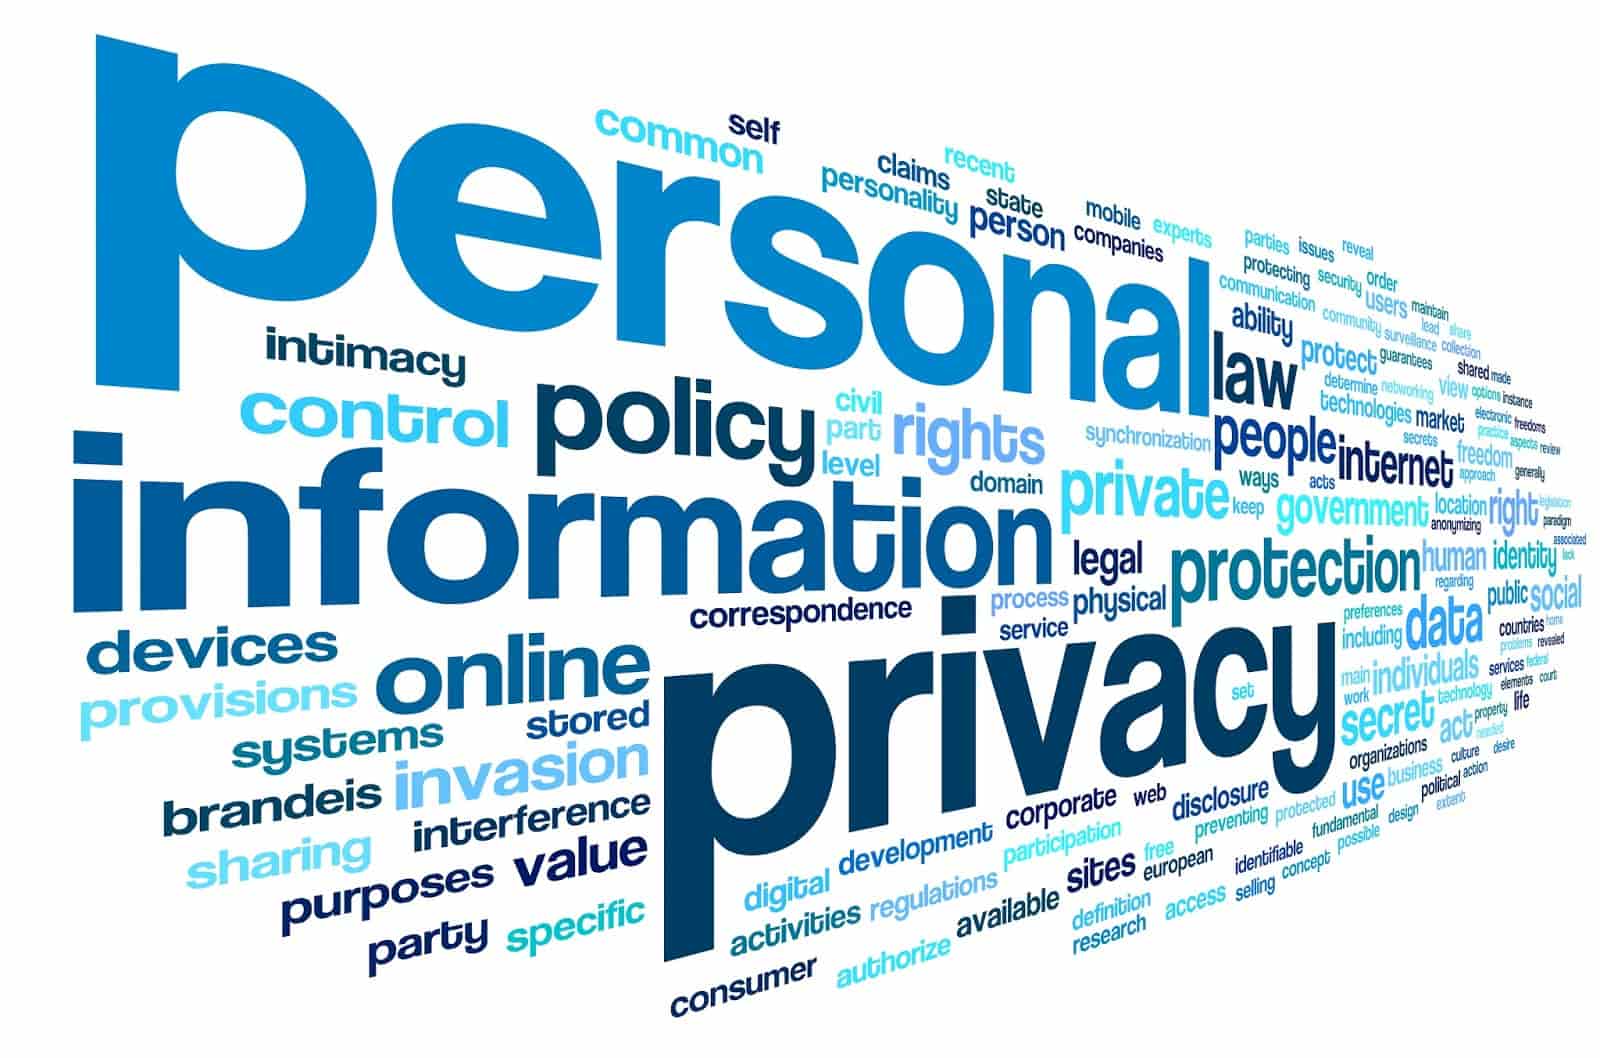 Private value. Information. Personal information презентация. Personal information картинка. Privacy Policy для сайта.